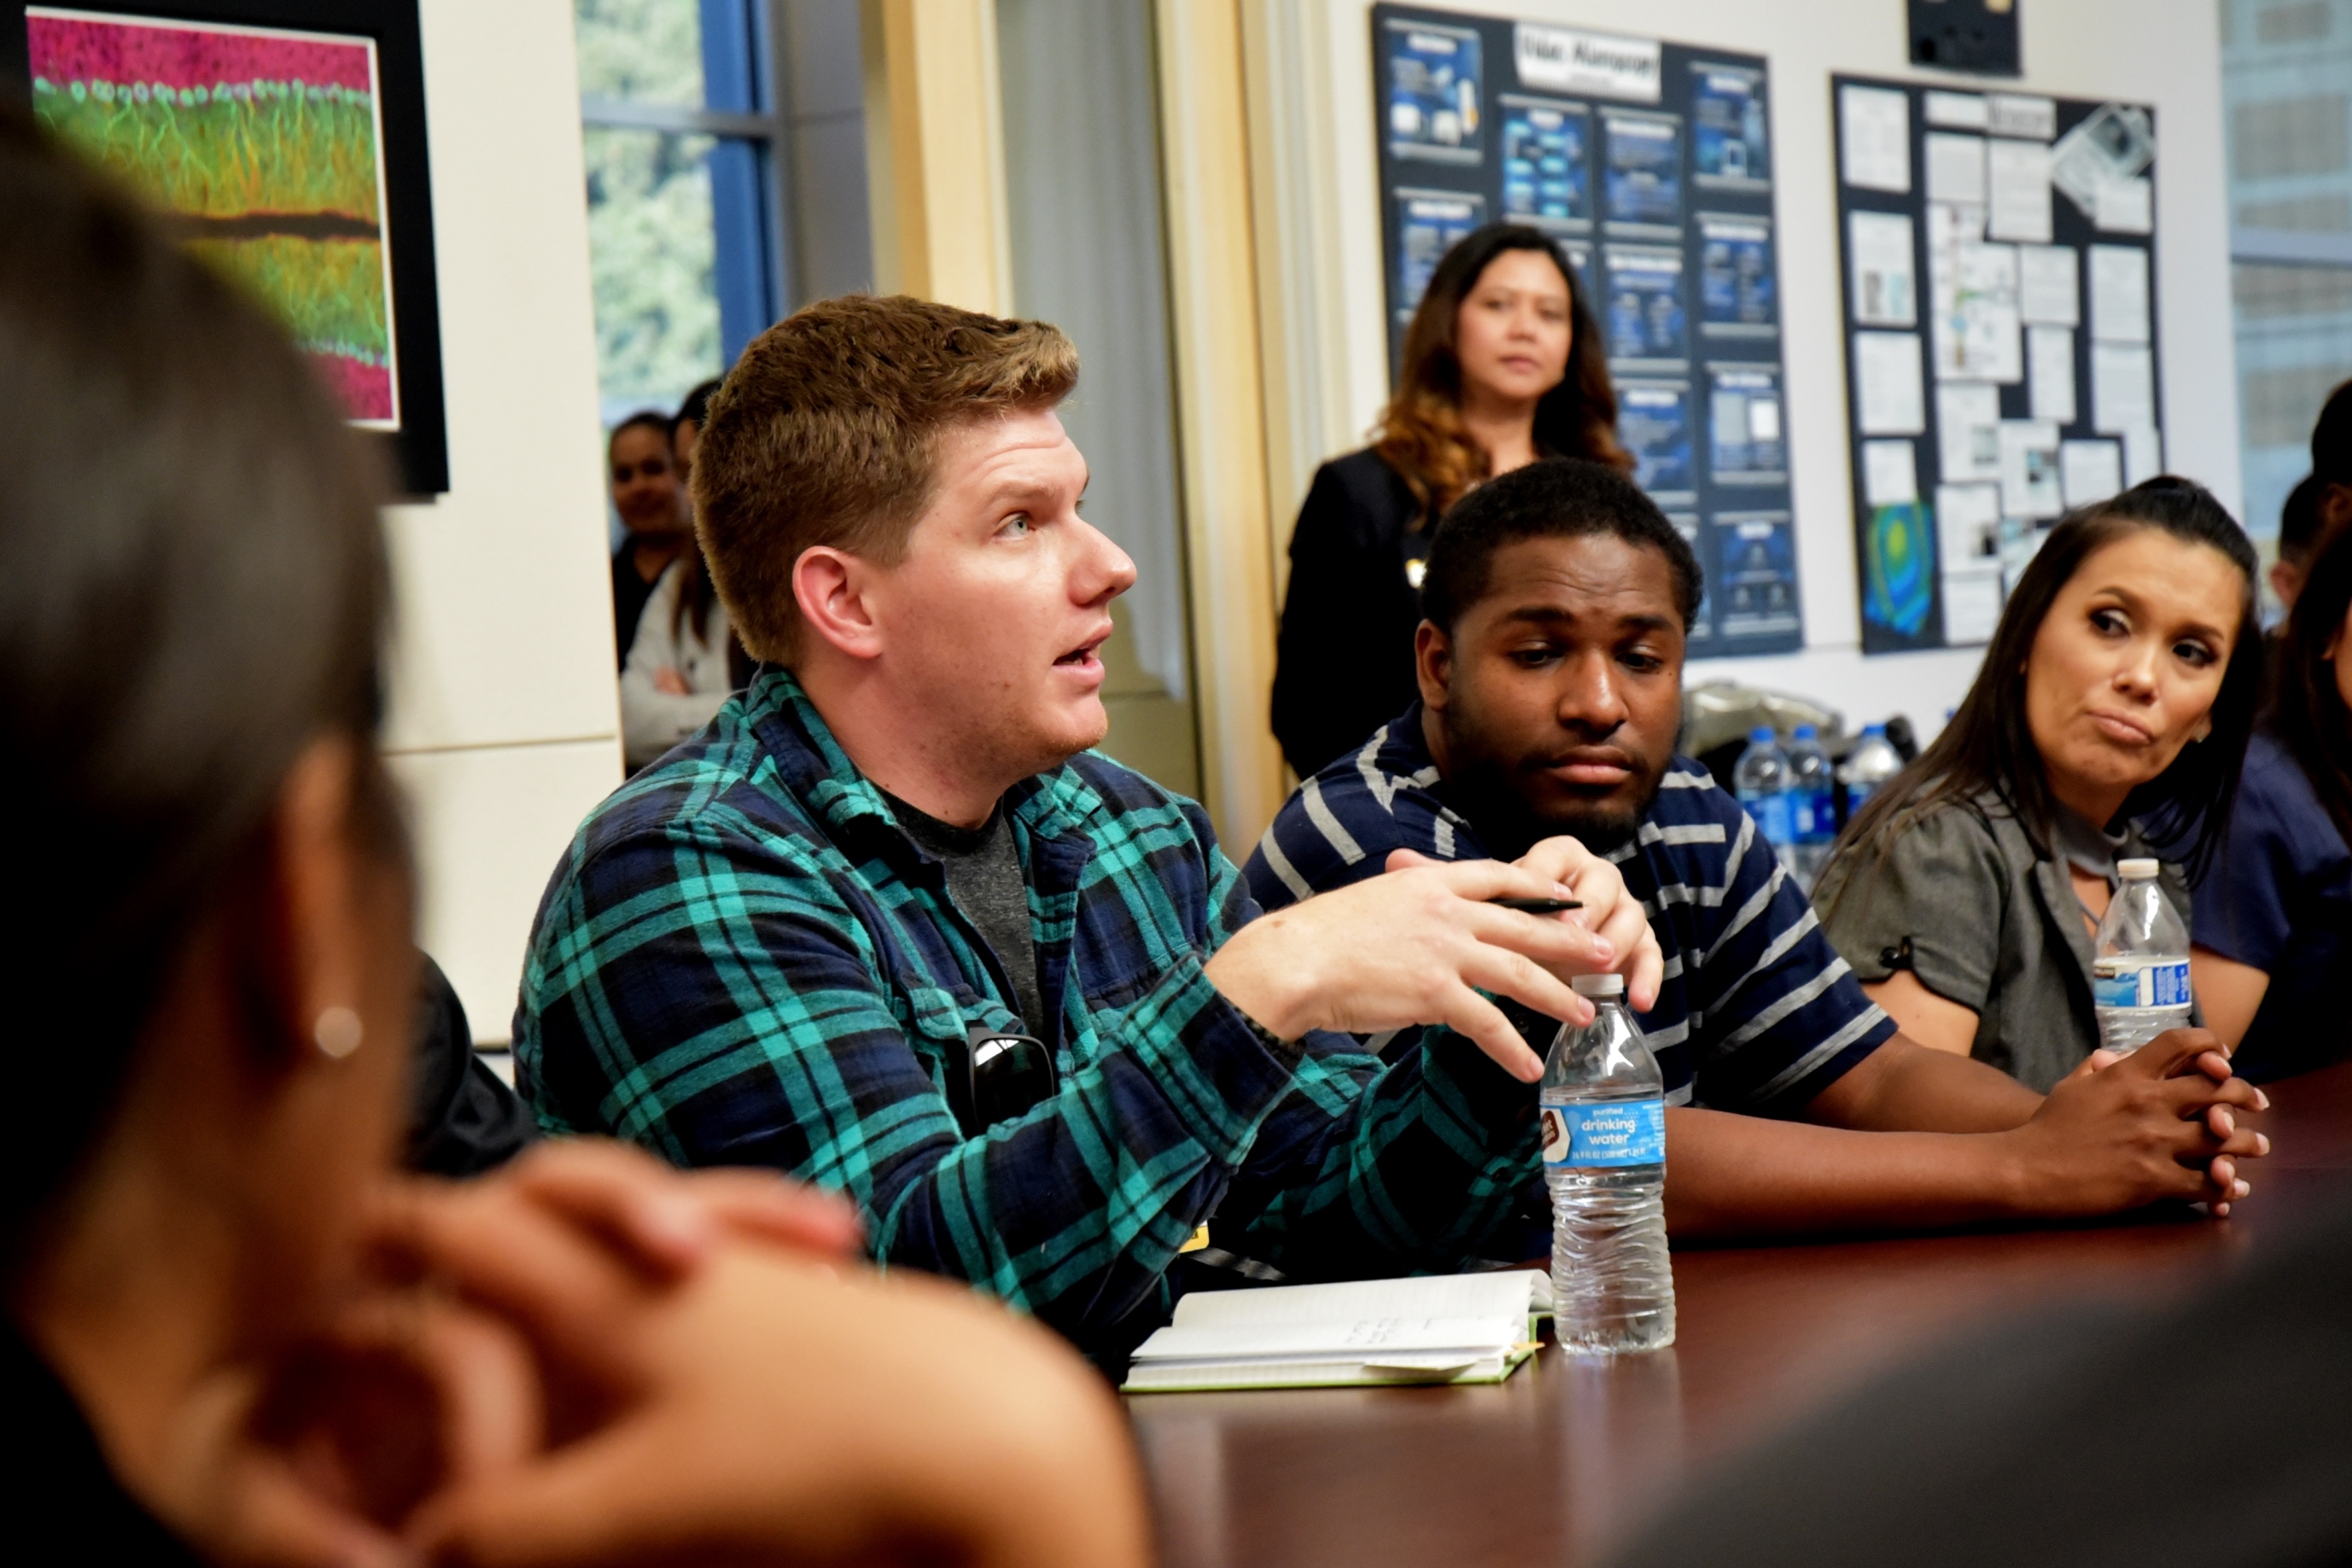 Students had a chance to ask questions of Chancellor Eloy Oakley during his visit to San Joaquin Delta College.